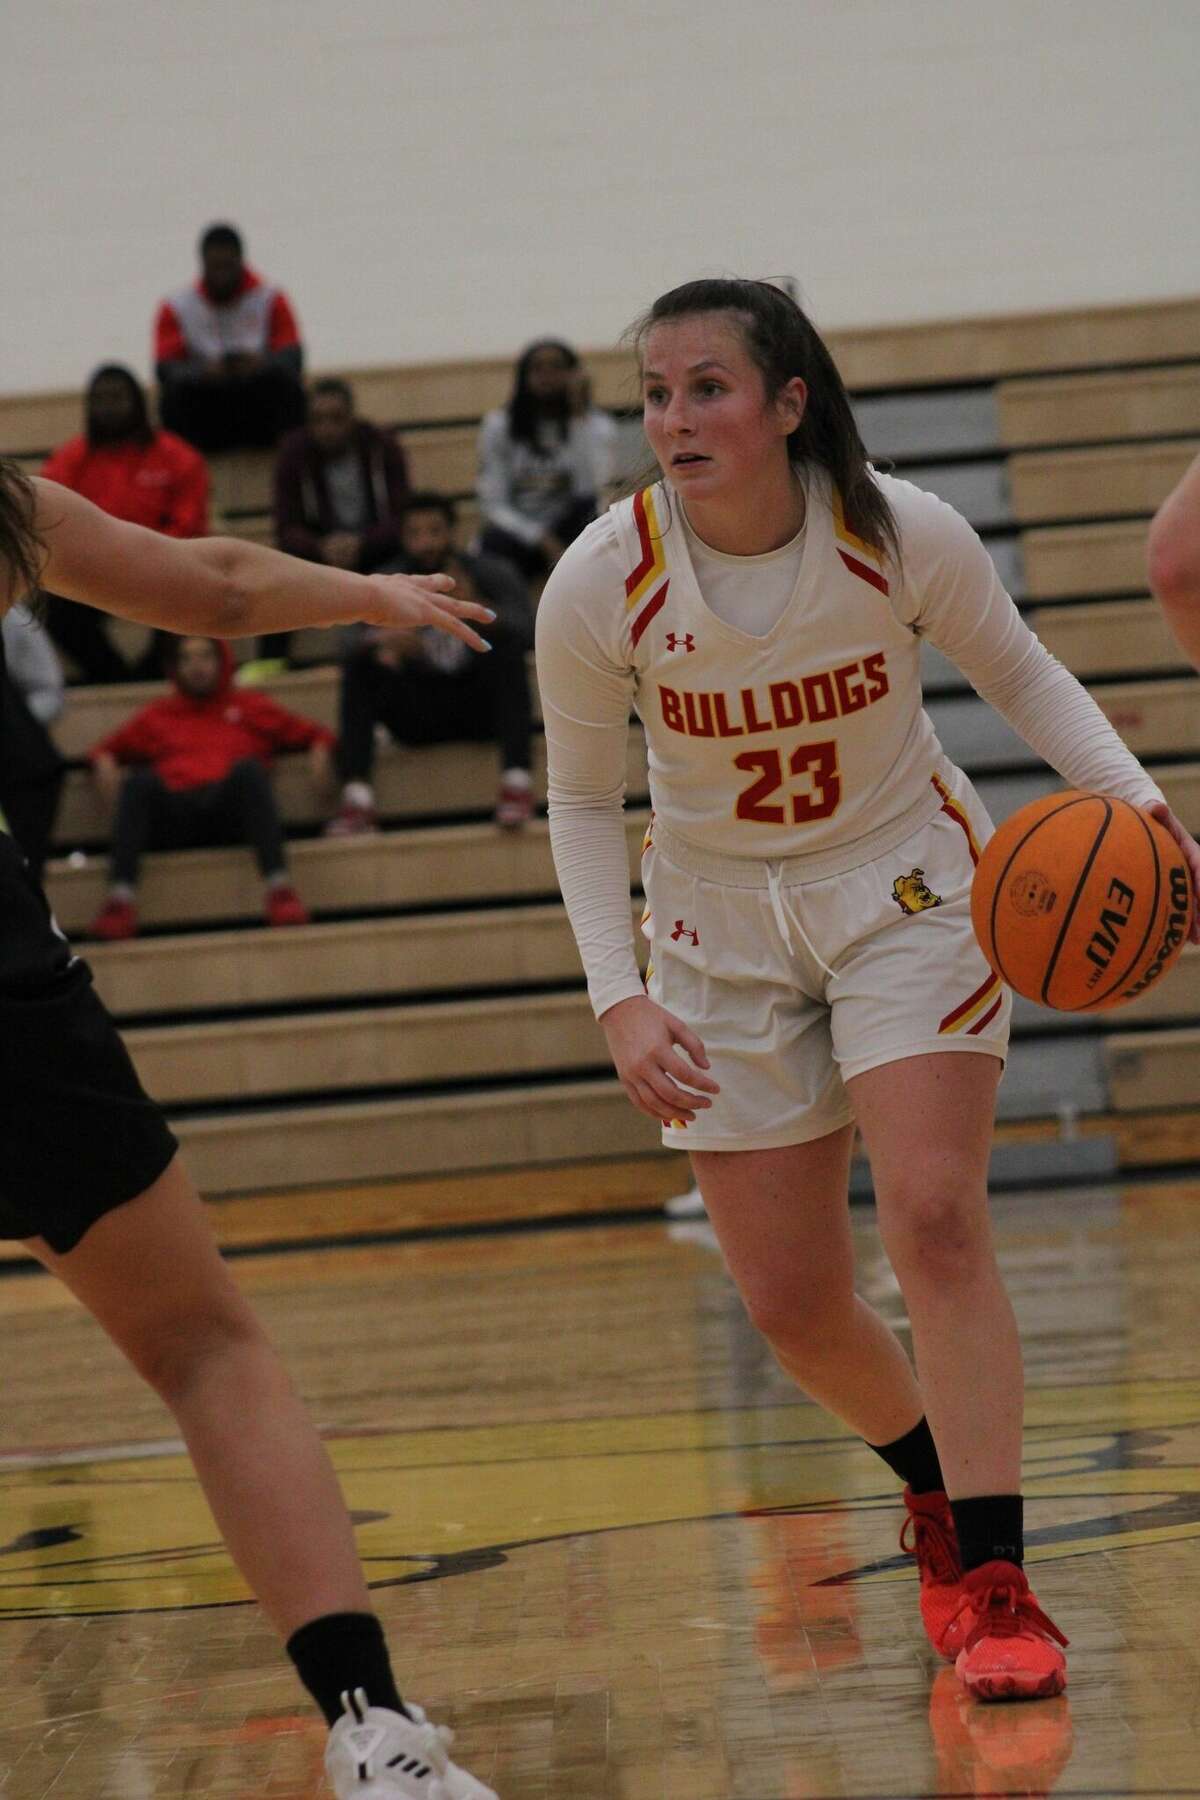 Senior guard Mallory McCartney scored 18 points in Ferris' loss to Grand Valley on Thursday.